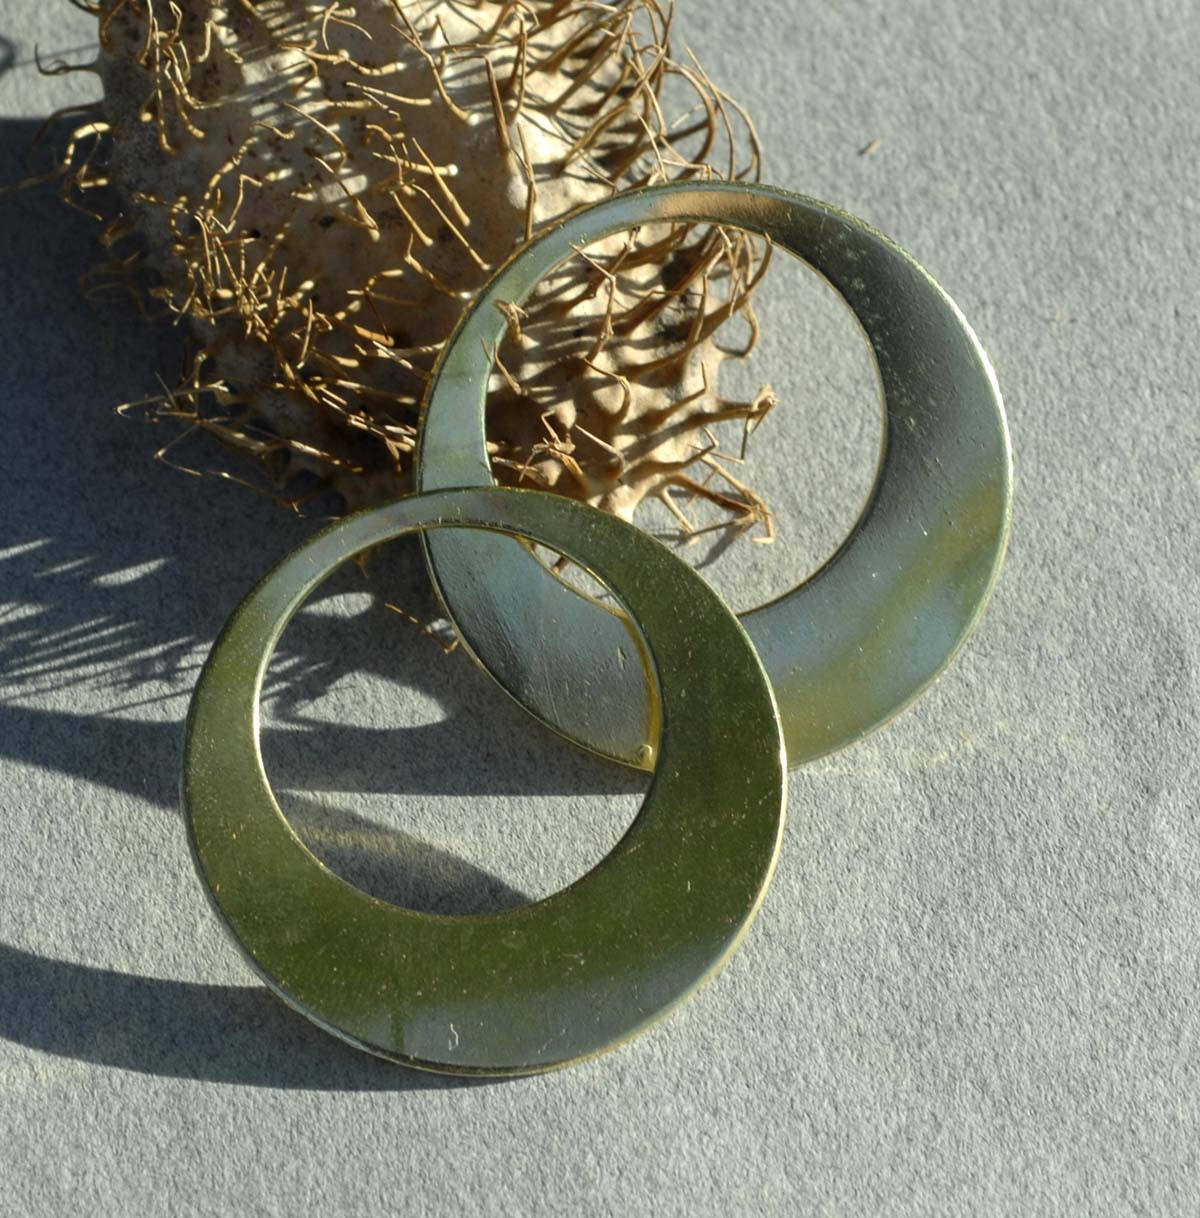 Brass Blanks Hoops 45mm 20G for Earrings or Pendant Offset Circle, Metalworking Supply, Handmade - 4 Pieces